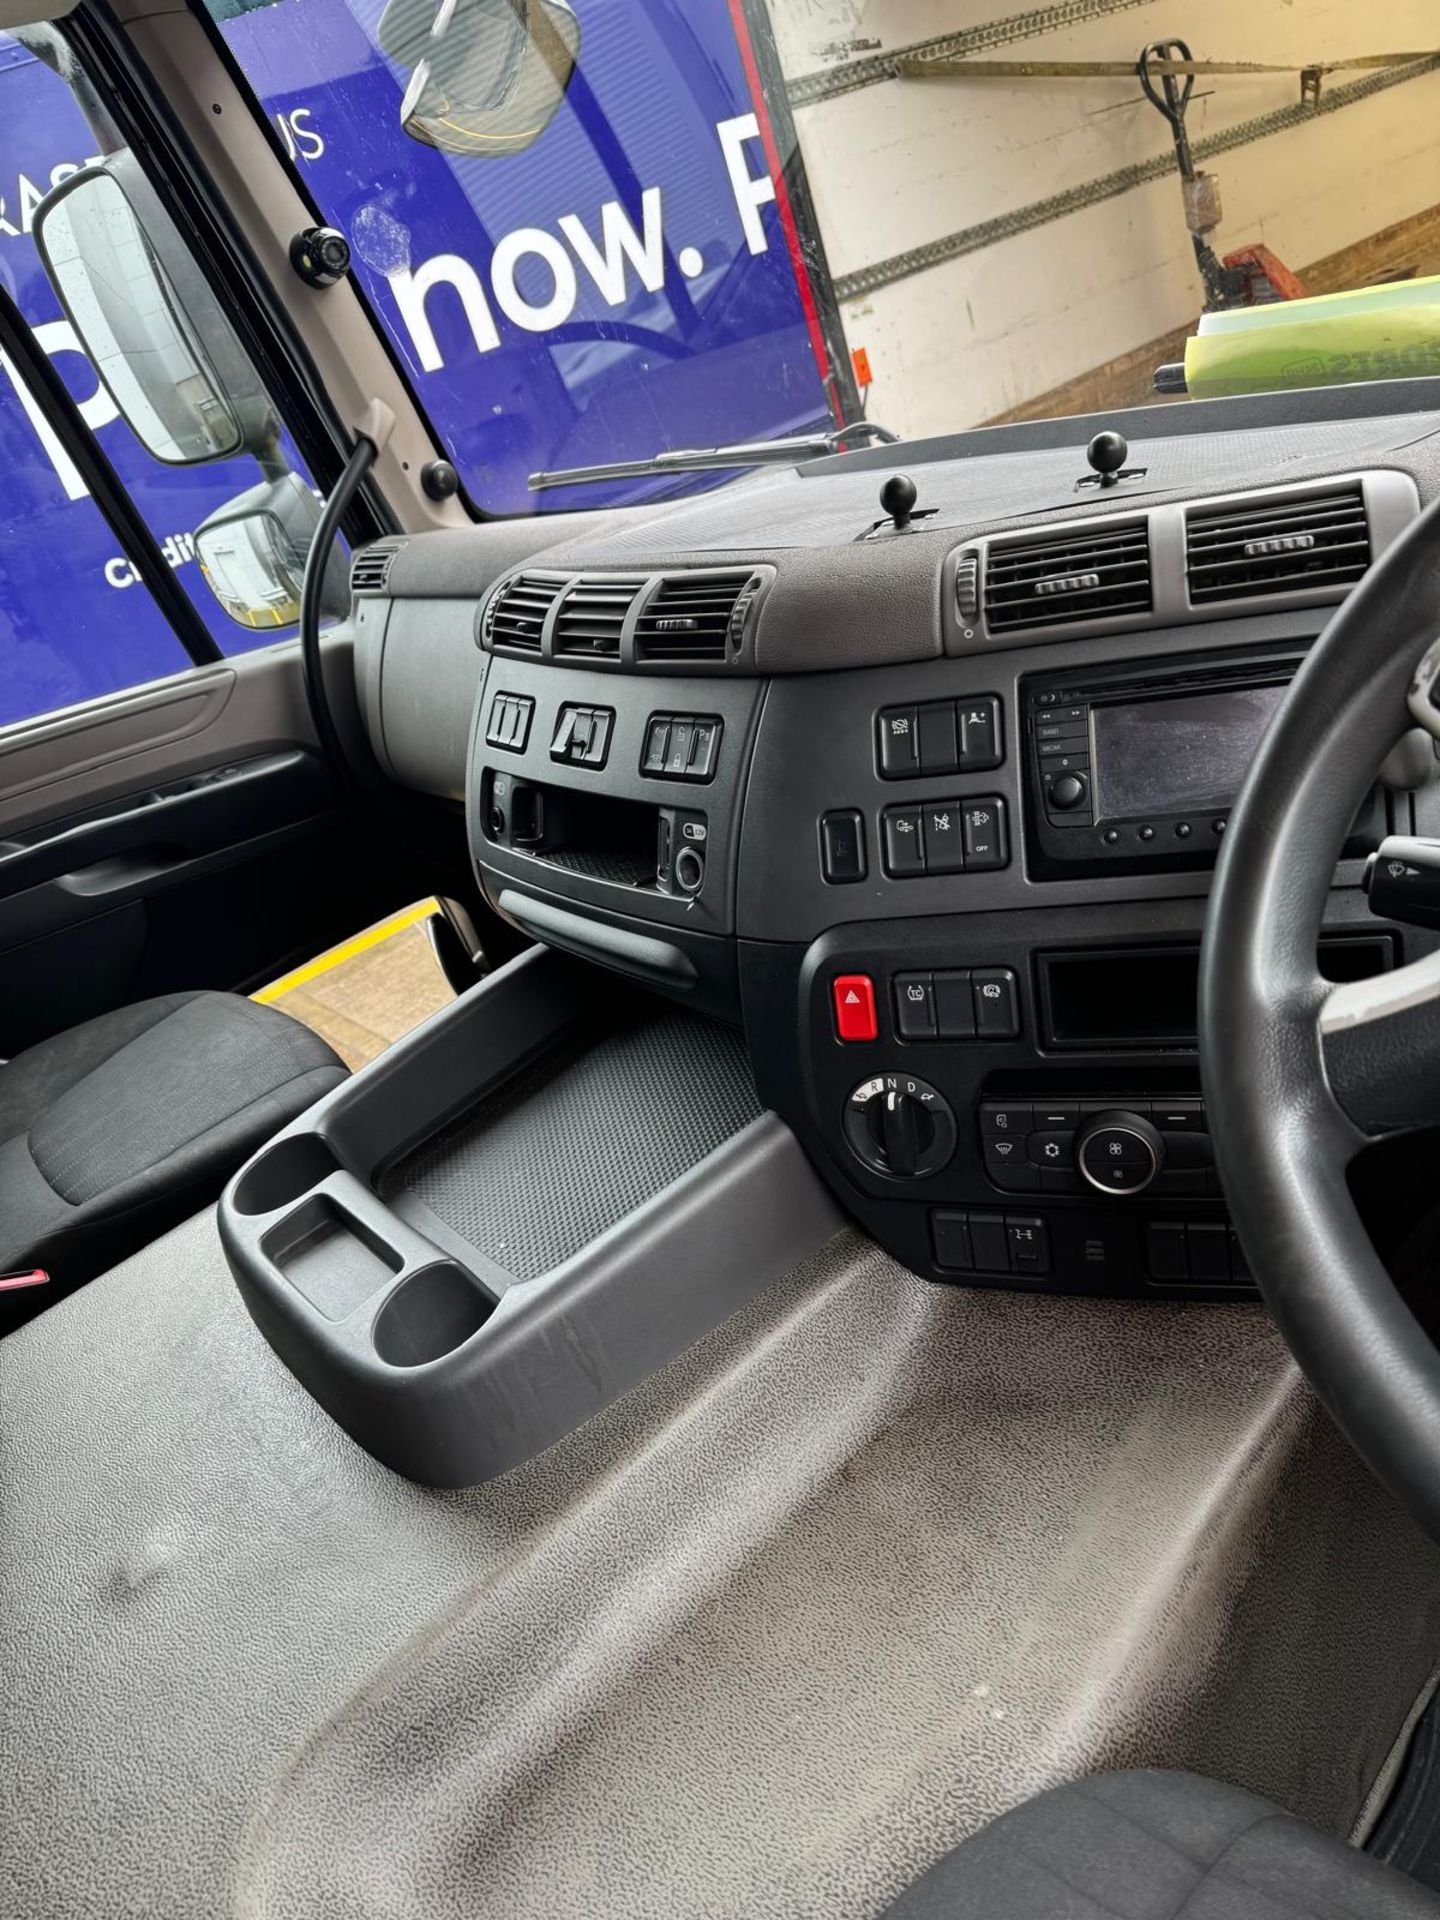 2019, DAF CF 260 FA - FN69 AXC (18 Ton Rigid Truck with Tail Lift) - Image 8 of 17